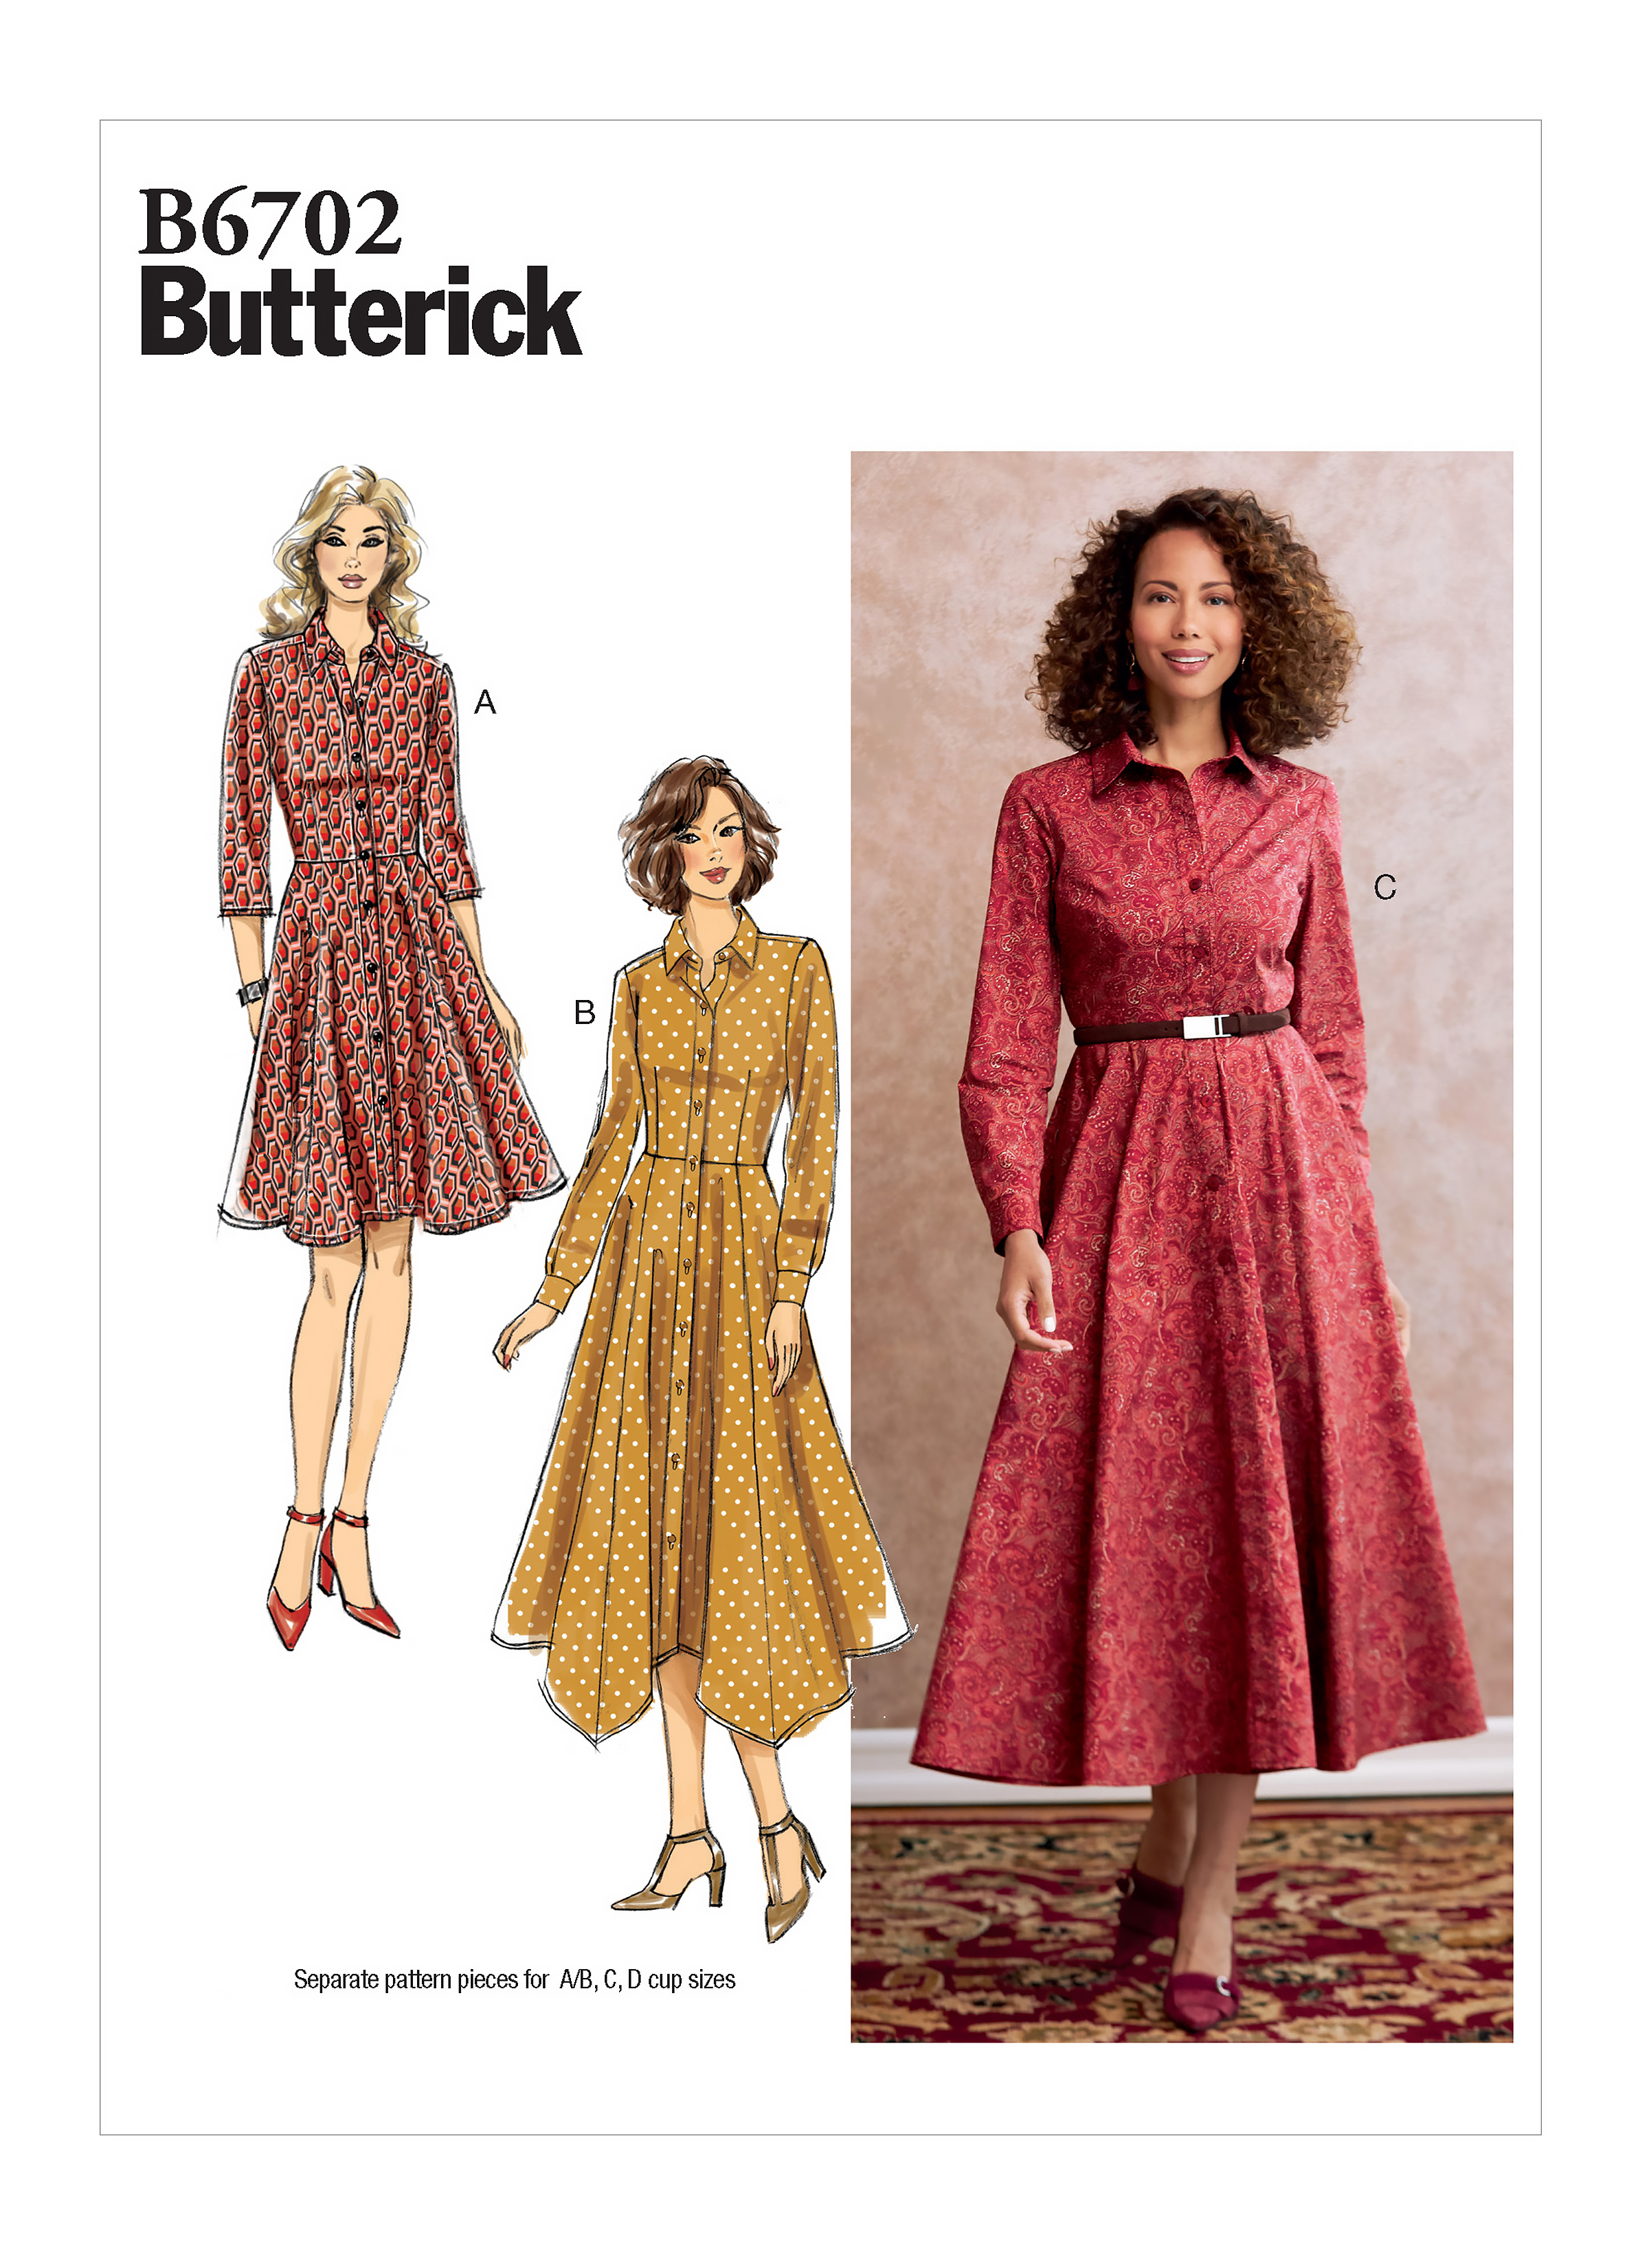 https://images.patternreview.com/sewing/patterns/butterick/2019/6702/6702.jpg